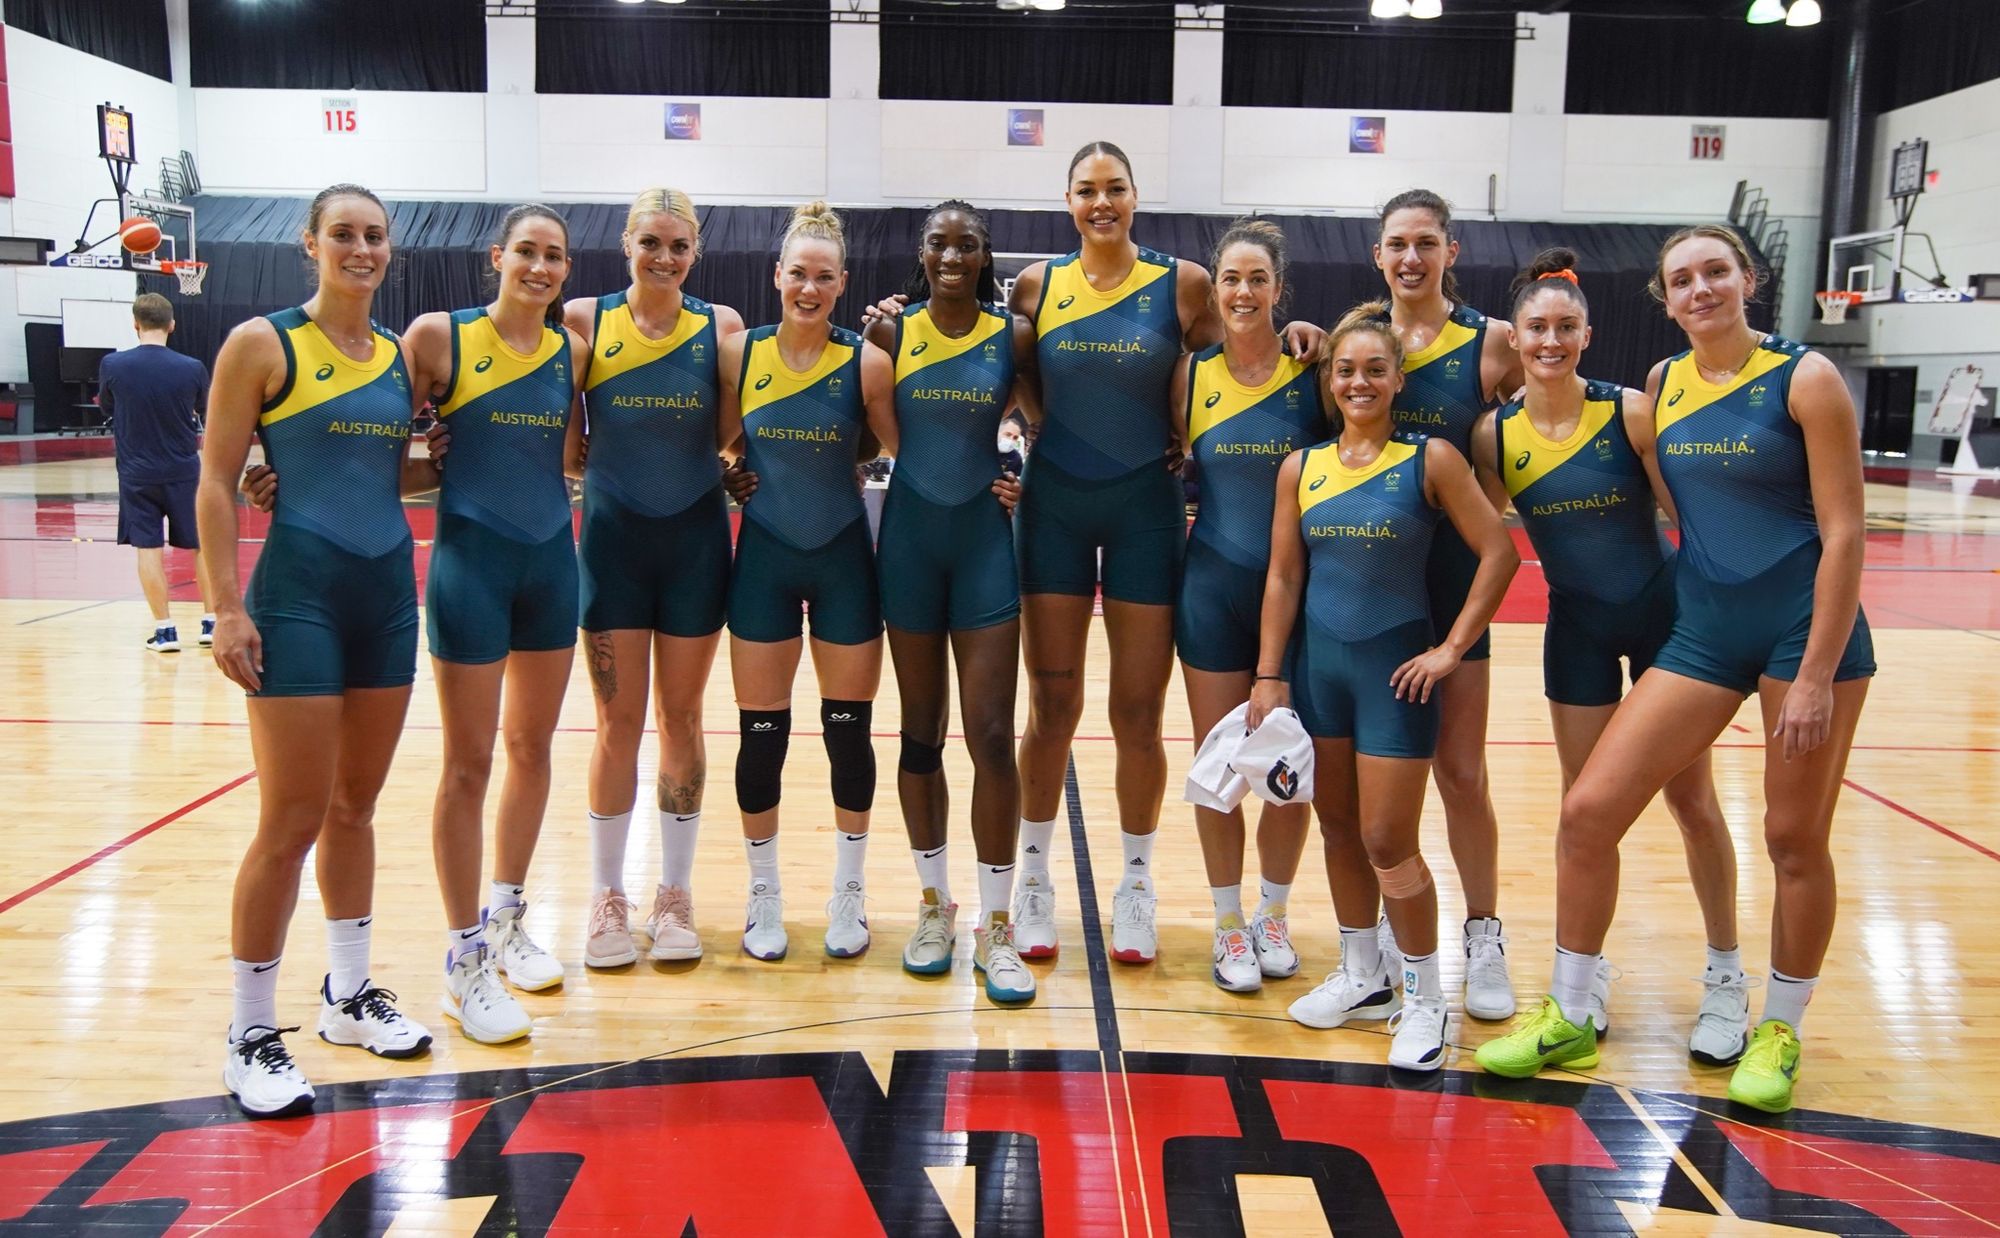 A photo of the members of the Australian Opals basketball team lined up on a court, wearing their green and yellow bodysuits.